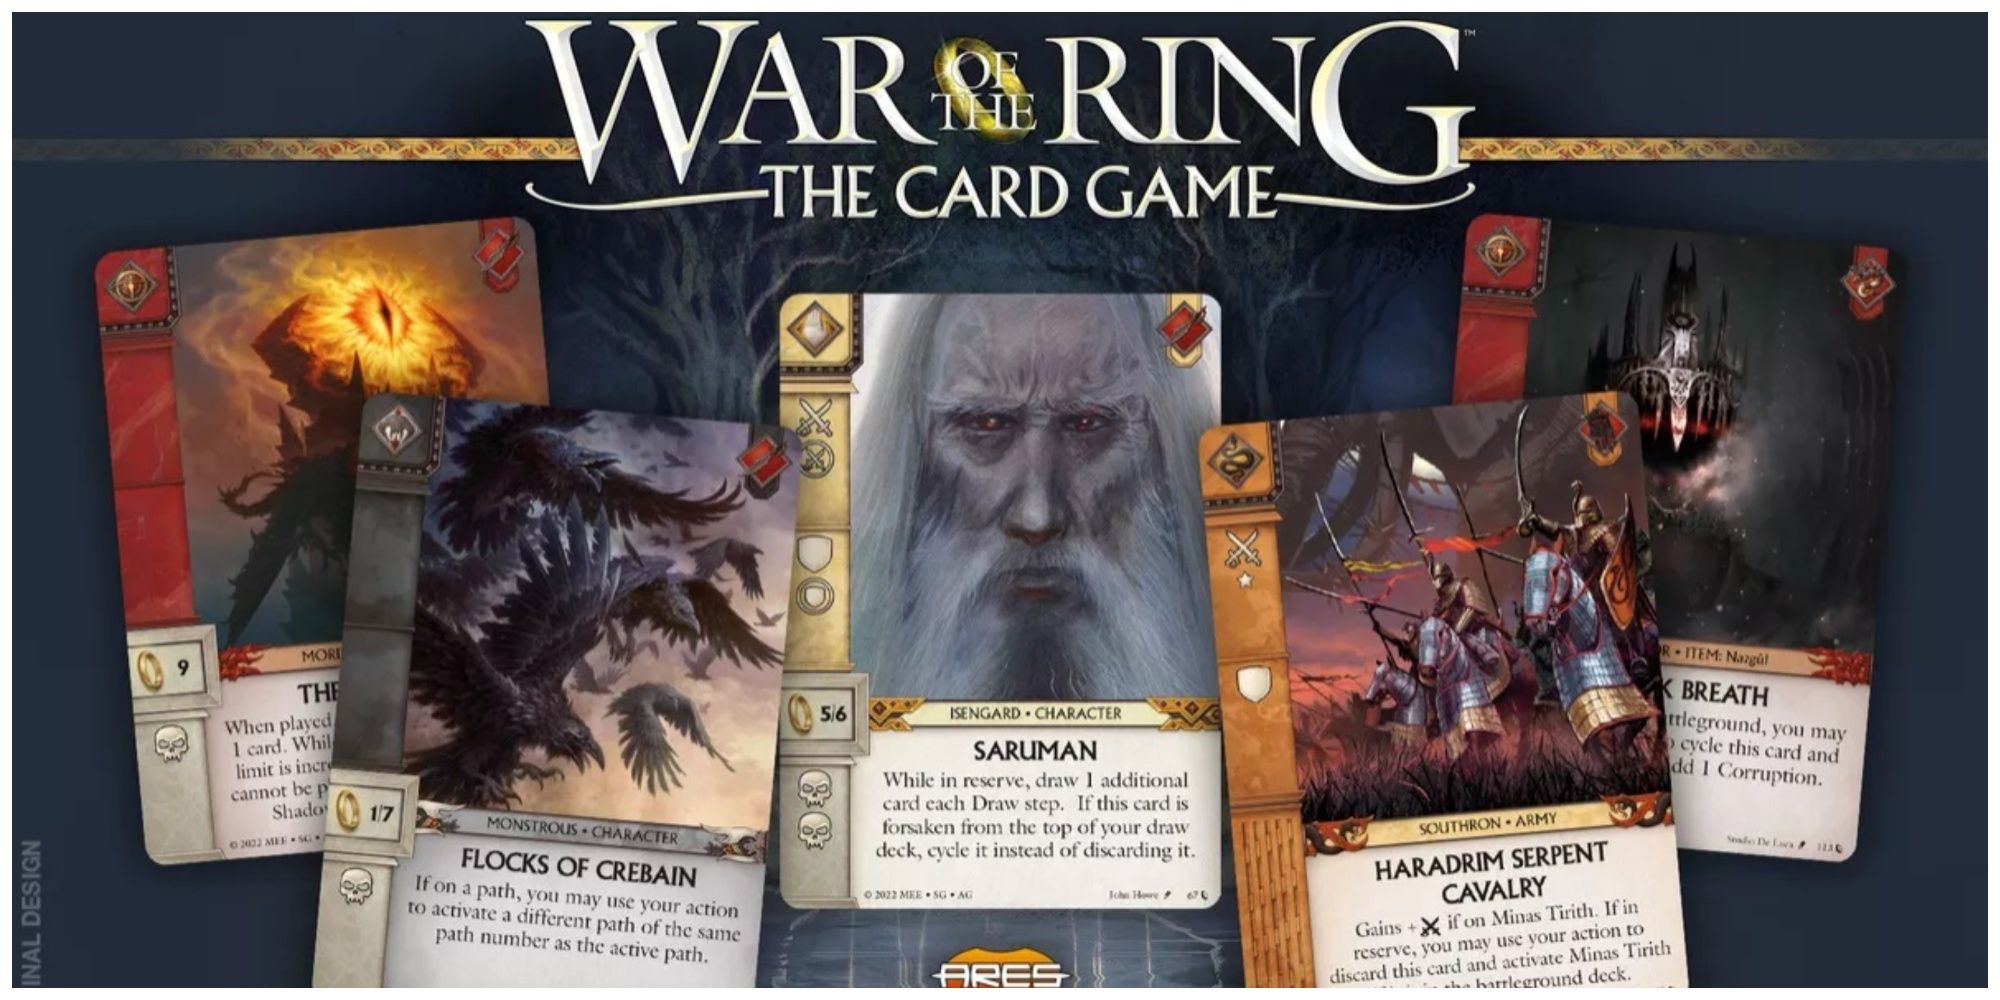 War Of The Ring: The Card Game Shadow Army cards